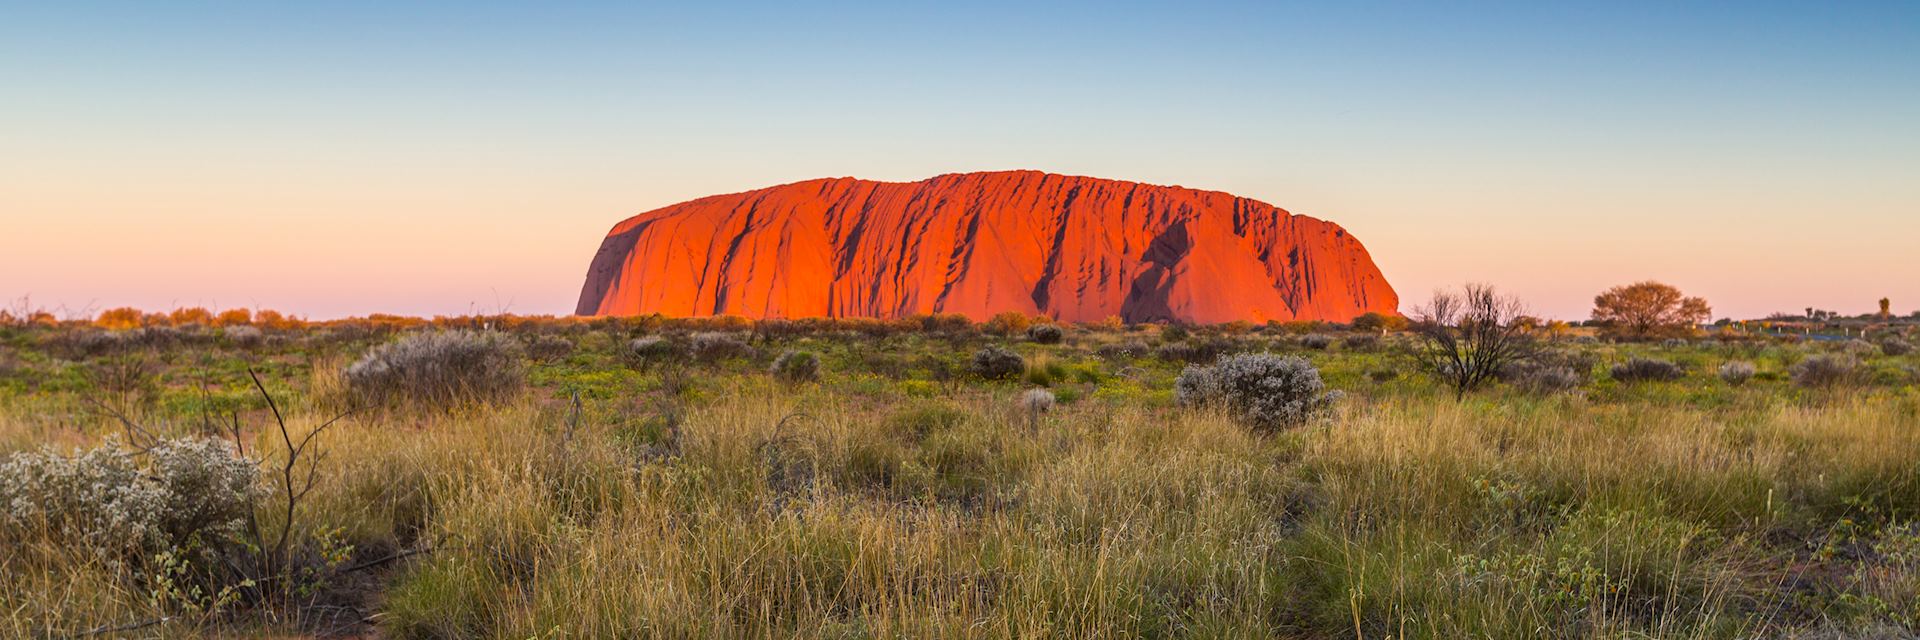 Uluru at sunrise, glowing with shades of red, orange, and purple against a clear sky.